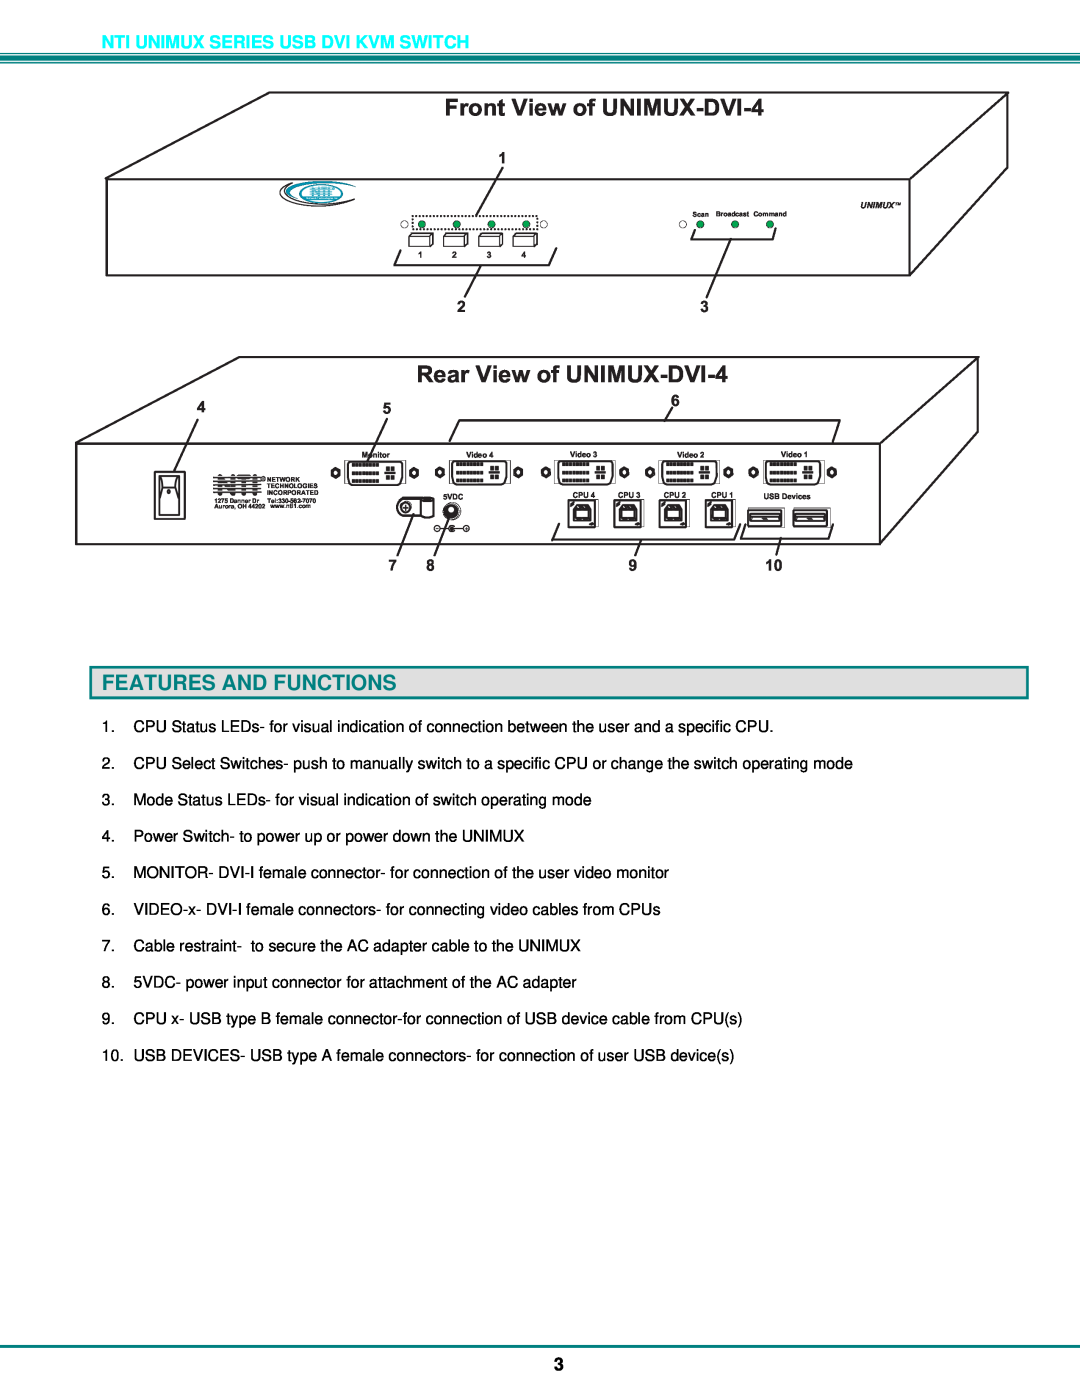 Network Technologies operation manual Features And Functions, FrontViewofUNIMUX-DVI-4, RearViewofUNIMUX-DVI-4 